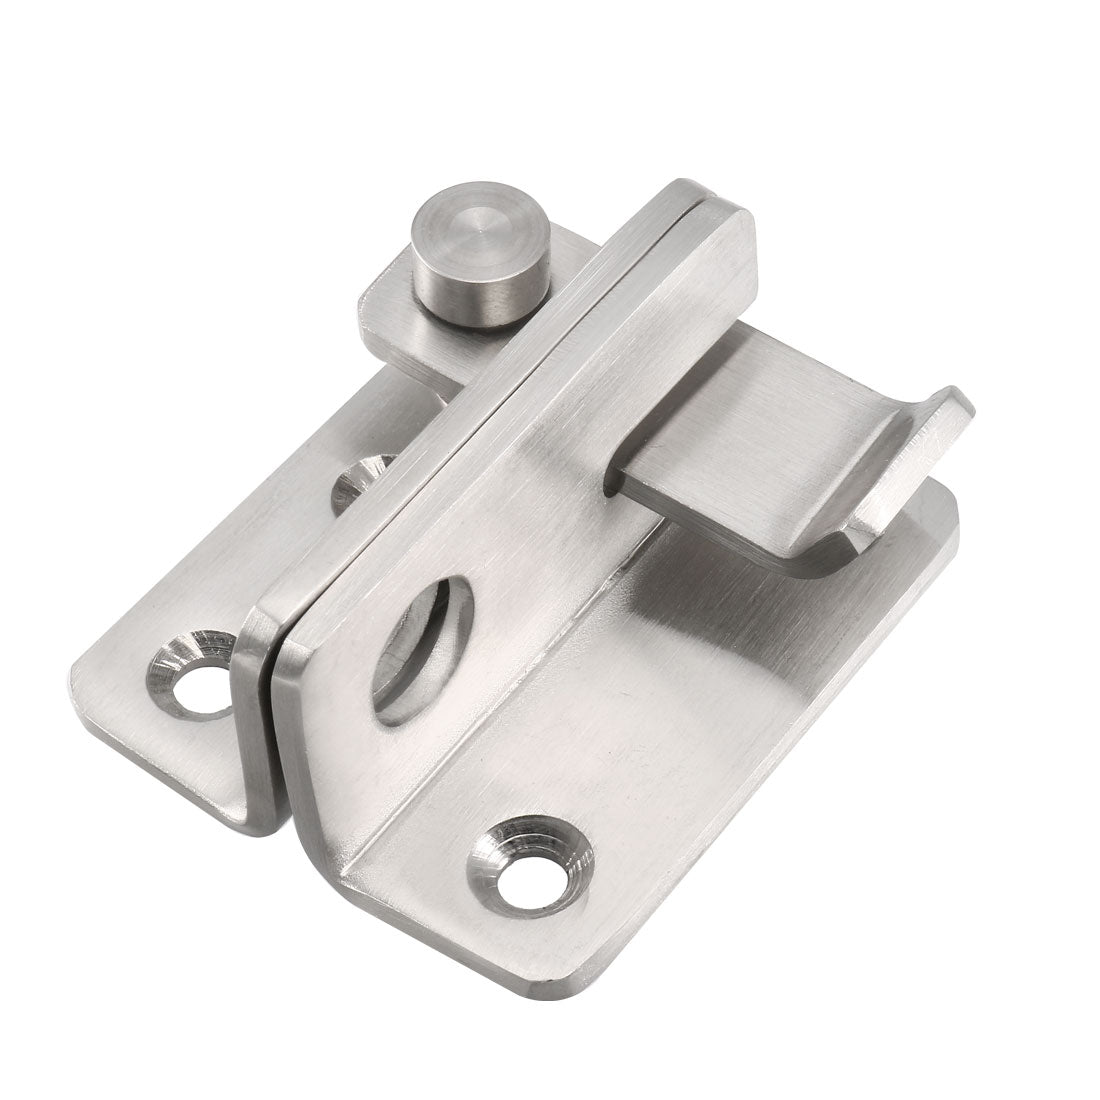 uxcell Uxcell Flip Door Latch 201 Stainless Steel 62x52mm Gate Latch Left Open Hasp Slide Lock with Padlock Hole 2 Pcs